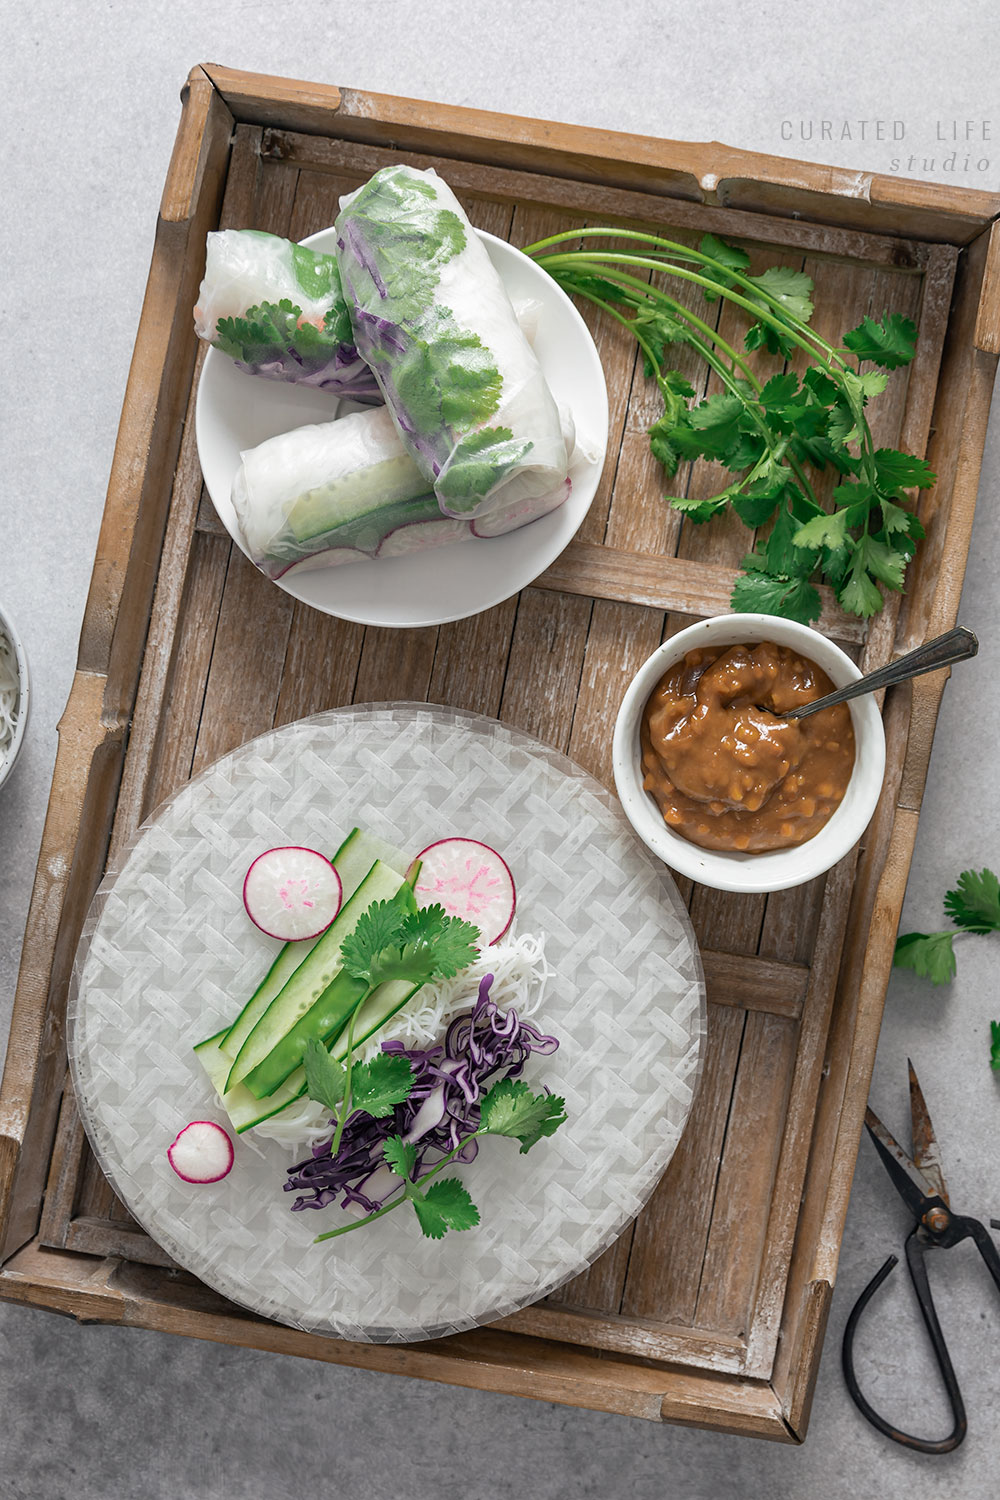 Birds eye view of rustic wooden tray. Inside sites an assortment of fresh ingredients used to make Rice Paper Rolls. Thinly sliced cucumber, crunchy cilantro and vibrant purple cabbage.  

#Vietnamese #Healthy #Peanut #Dipping #Sauce #Vegetarian #Vegan #Gluten-free #Tofu #Recipe #Rice #Paper #Spring #Rolls #Fresh